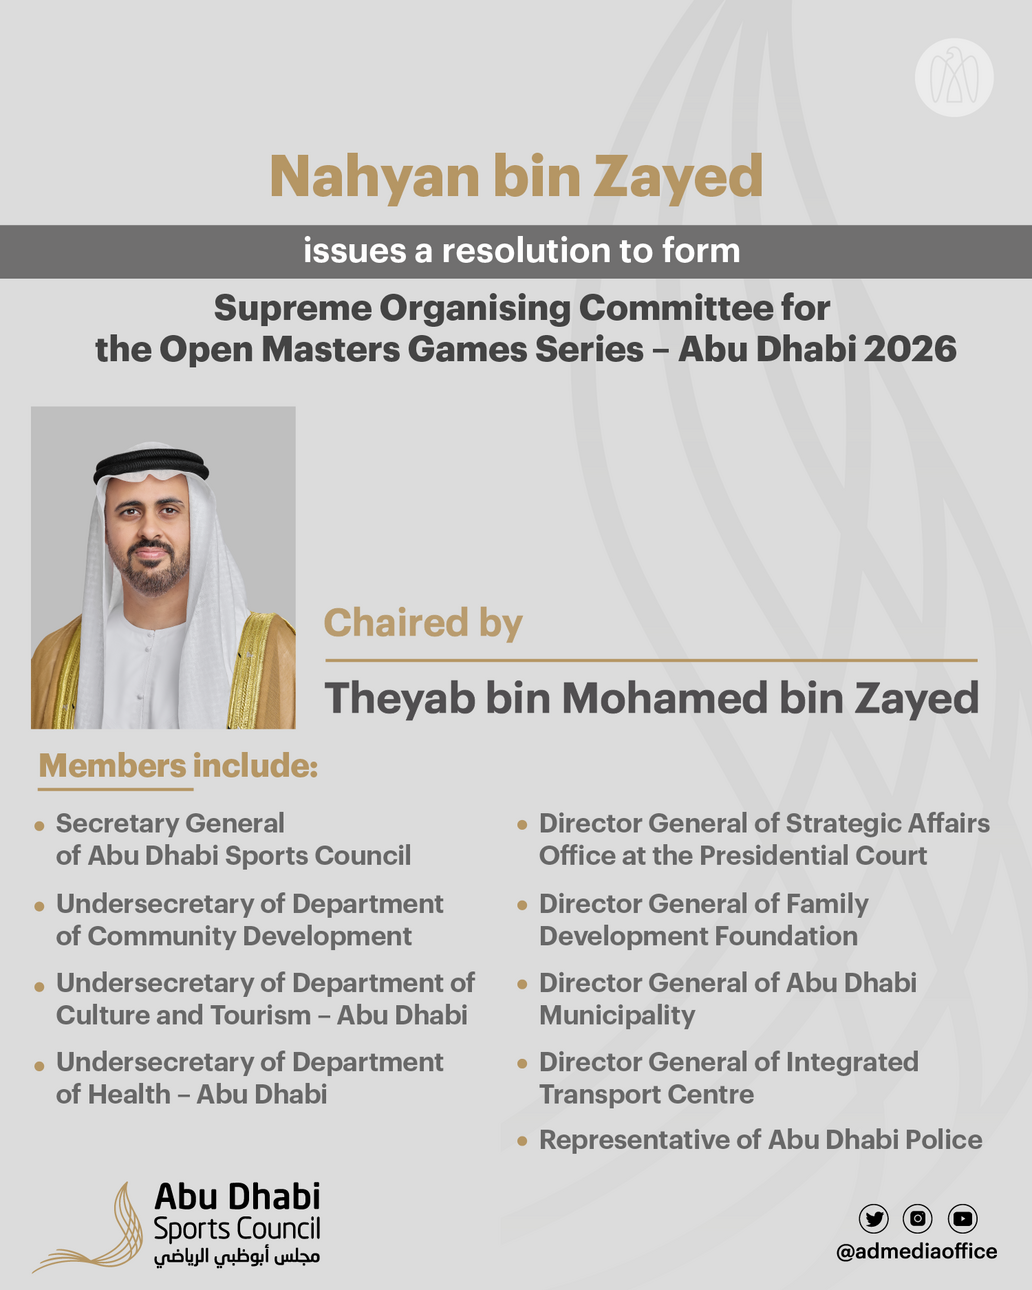 Nahyan bin Zayed issues resolution to form Supreme Organising Committee for the Open Masters Games Series – Abu Dhabi 2026,  chaired by Theyab bin Mohamed bin Zayed